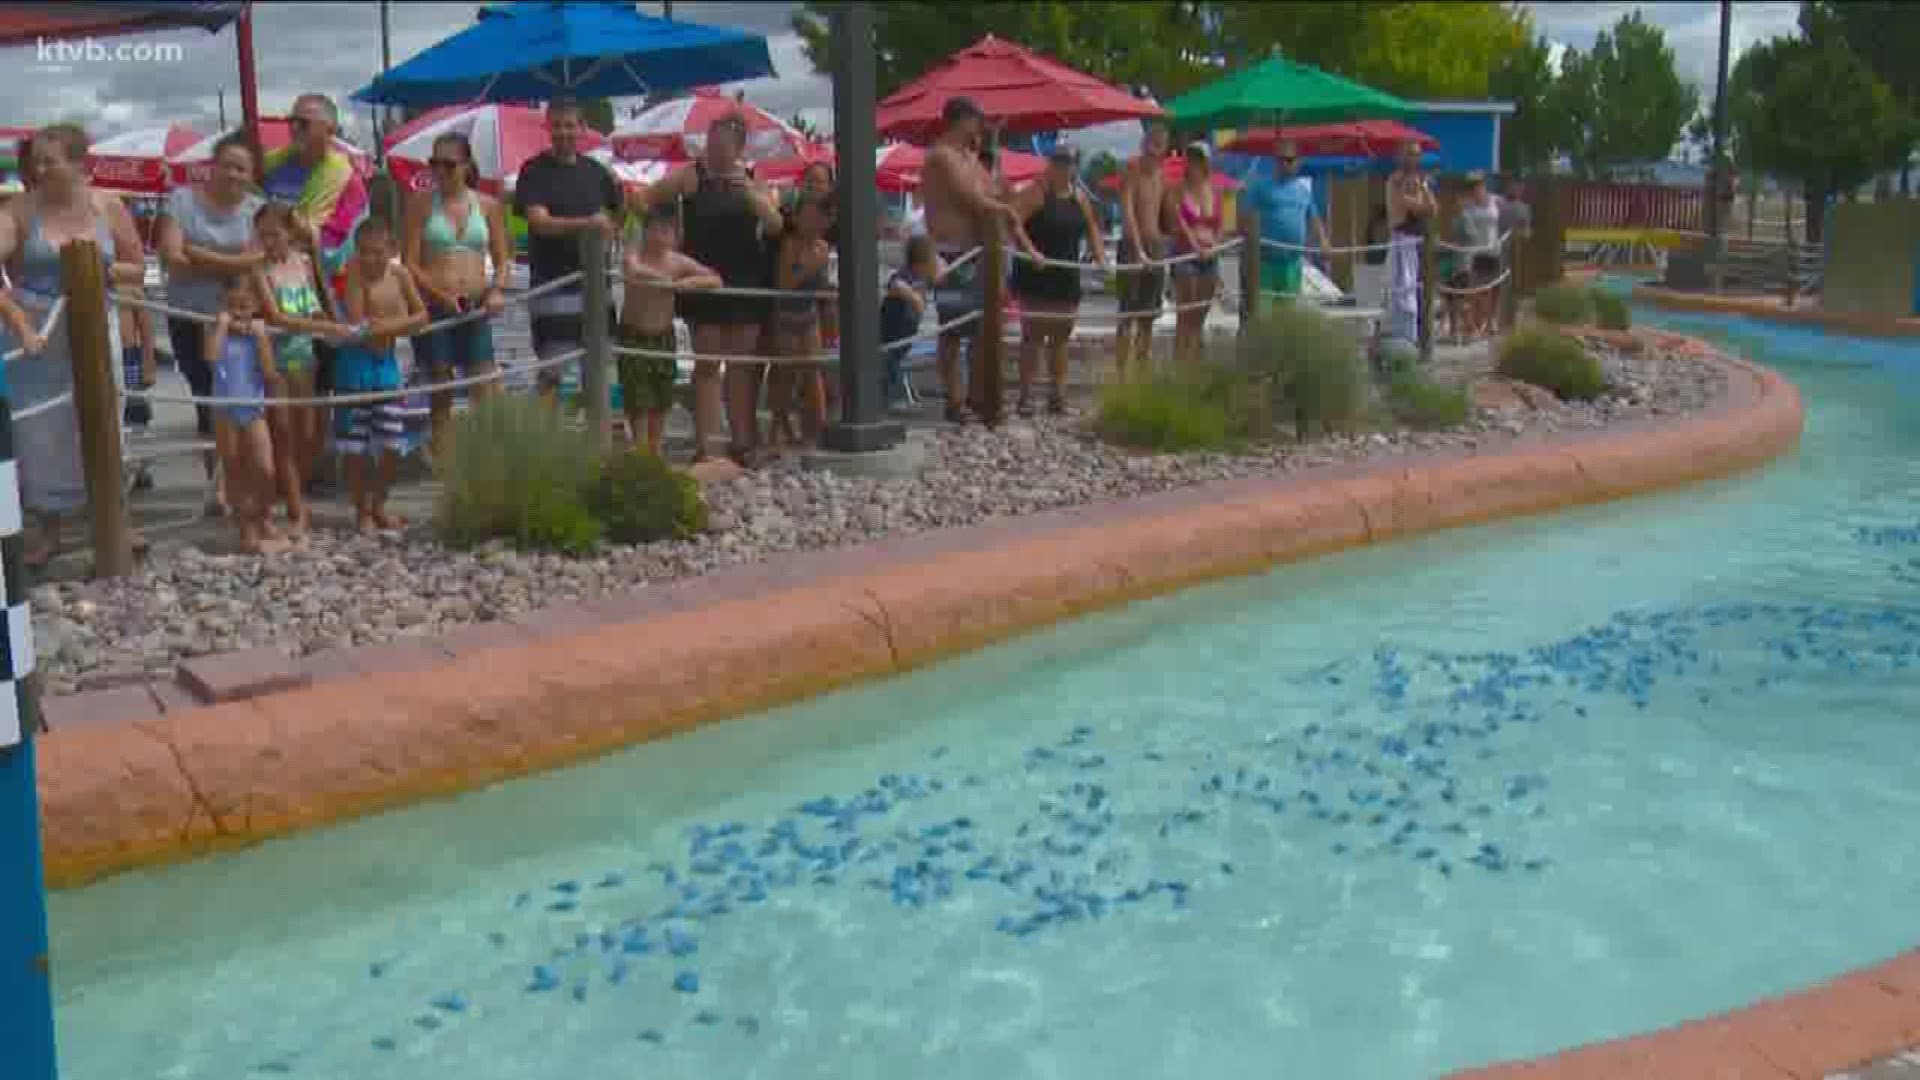 Ten thousand toy dolphins raced to the finish line in Roaring Springs' Endless River Sunday at the 19th annual Dolphin Dunk, an event that aims to raise $30,000 for the Boys & Girls Club. Membership at the Boys & Girls Club costs $25 a year, a fee that doesn't come close to covering all the program's expenses.